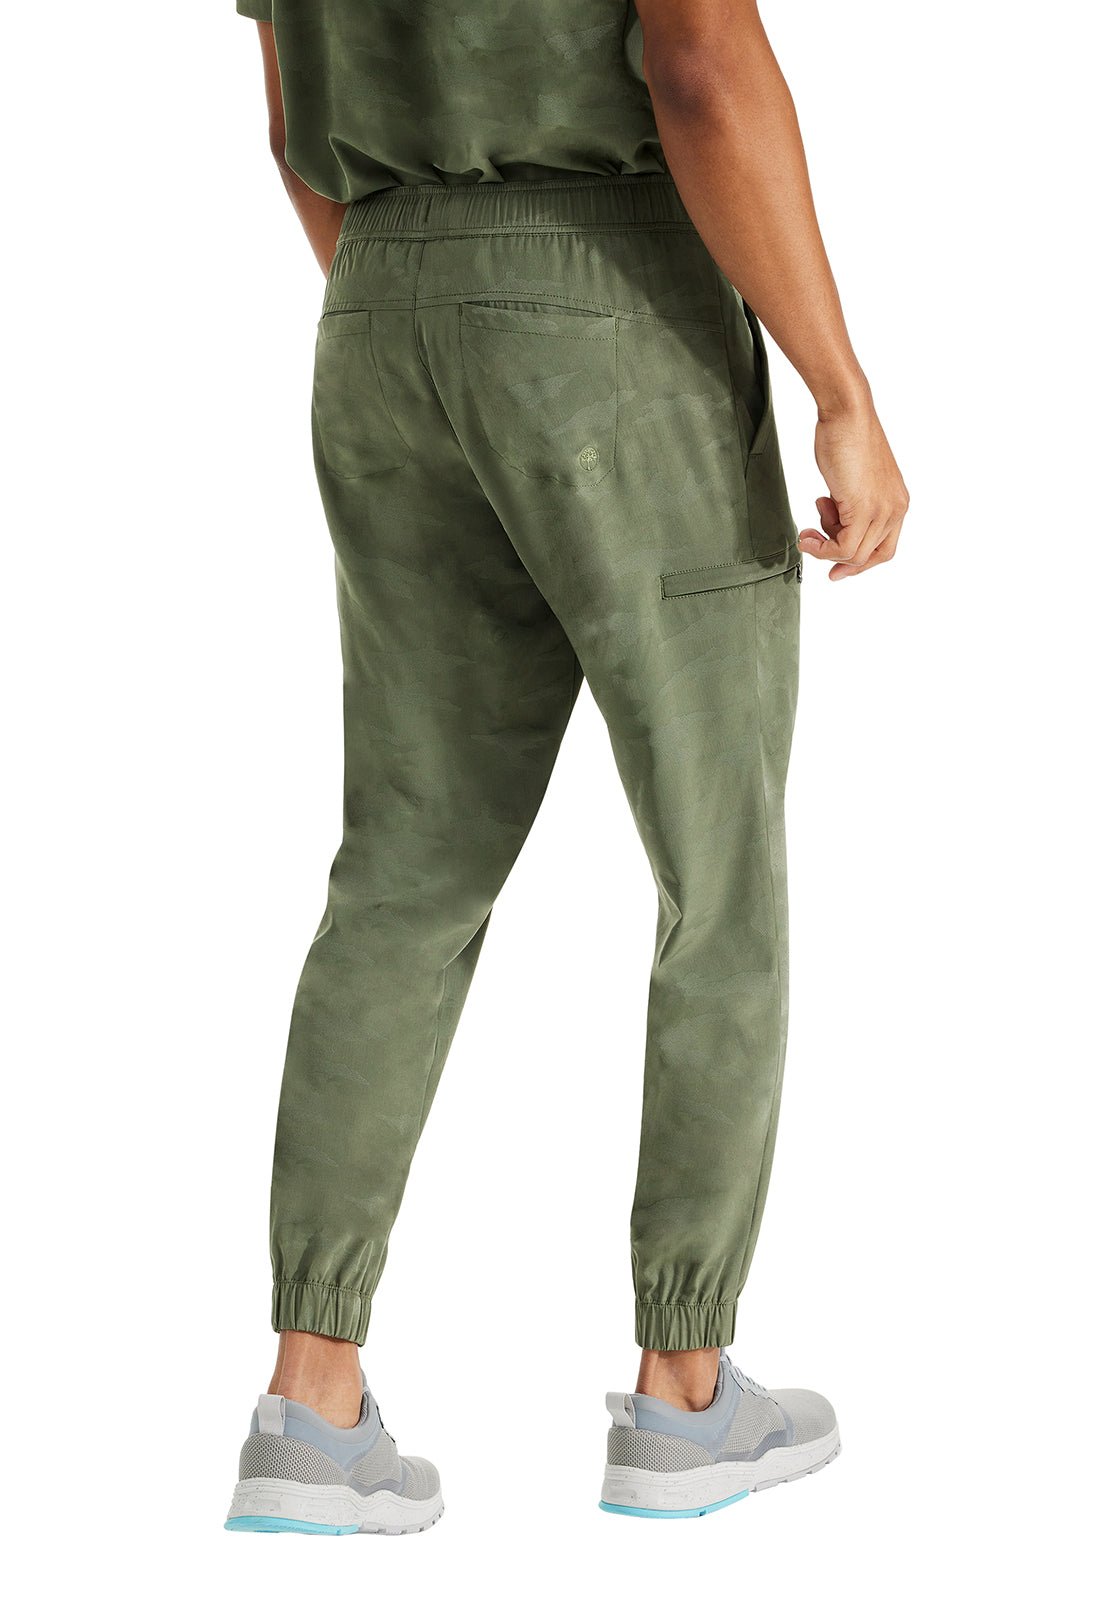 Healing Hands Men's Camo Scrub Jogger Pant 9360 in Black, Navy, Olive, Pewter - Scrubs Select